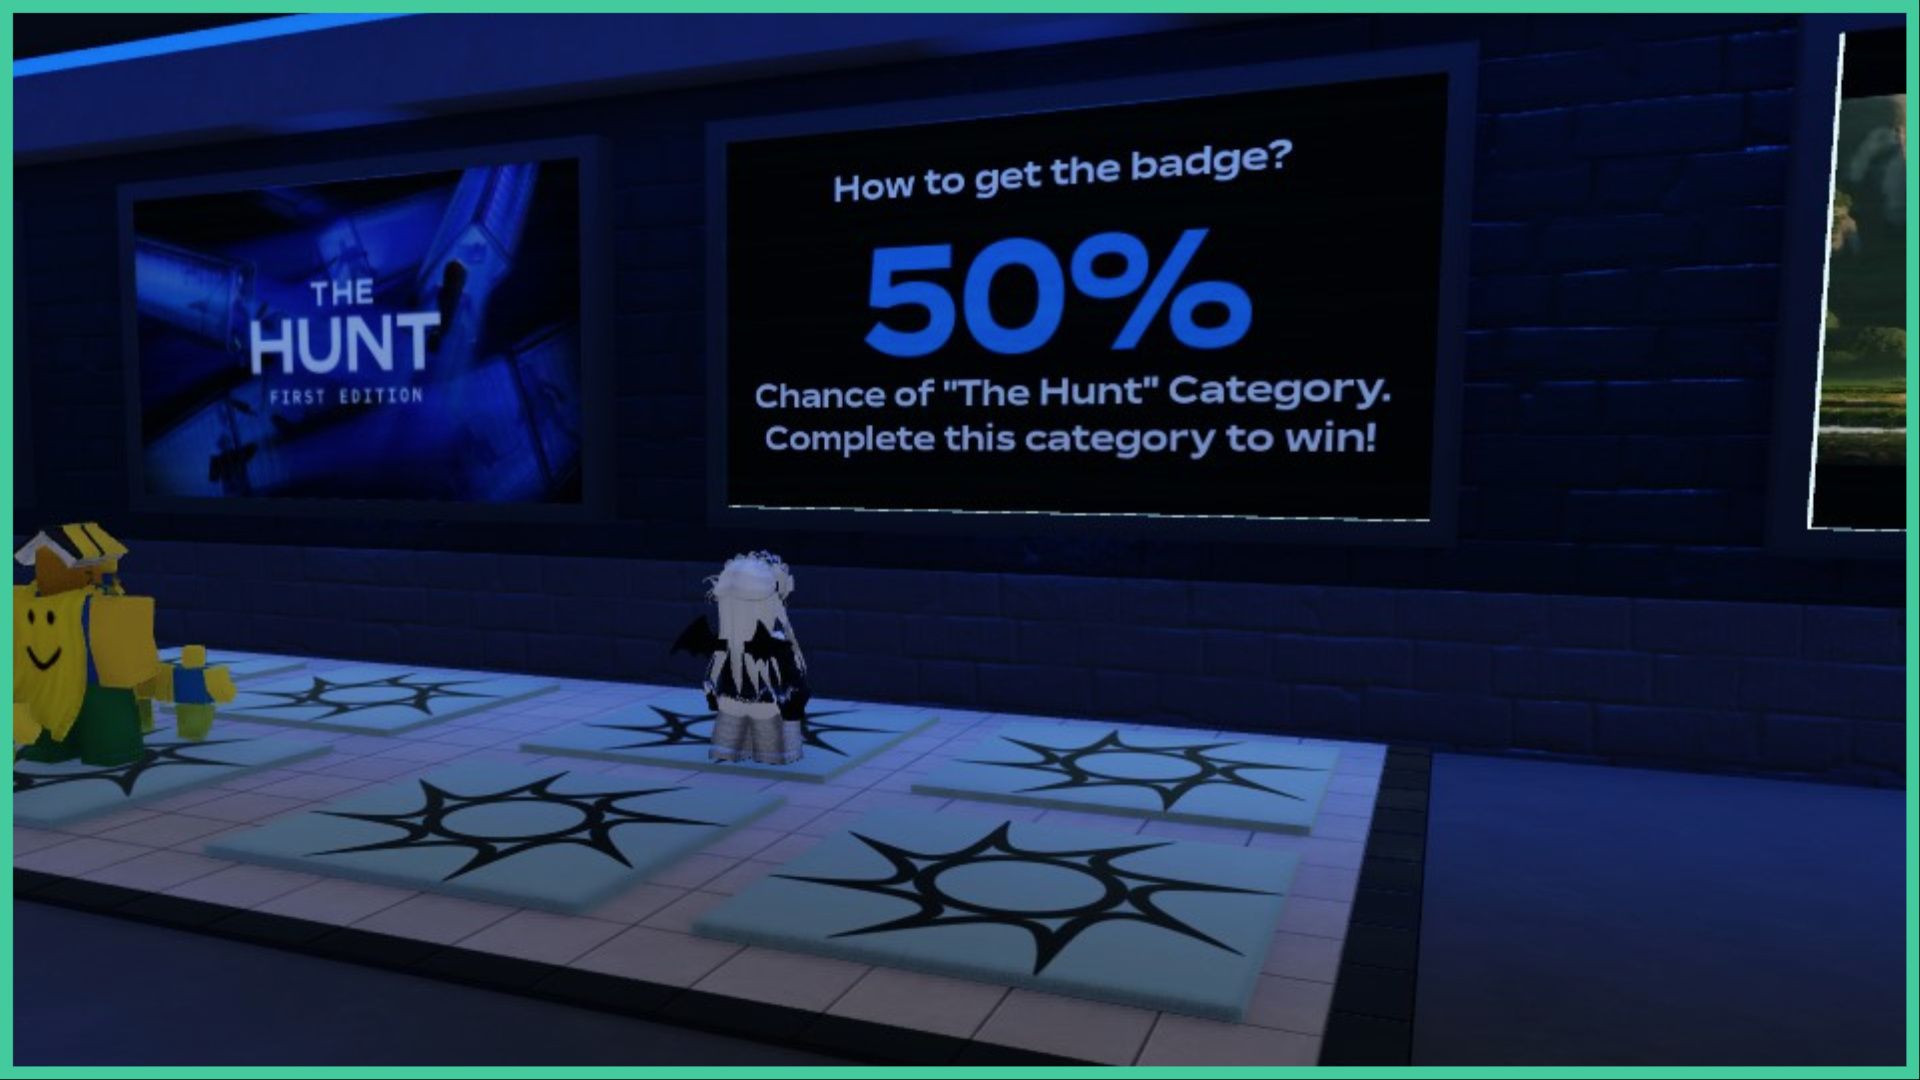 feature image for our deadly decisions the hunt guide, the image features a screenshot from the game of a roblox player standing on the category vote platform while facing the giant screens on the wall to advertise the hunt event, as well as a screen that reads 'how to get the badge? 50% chance of the hunt cateogry, complete this category to win'